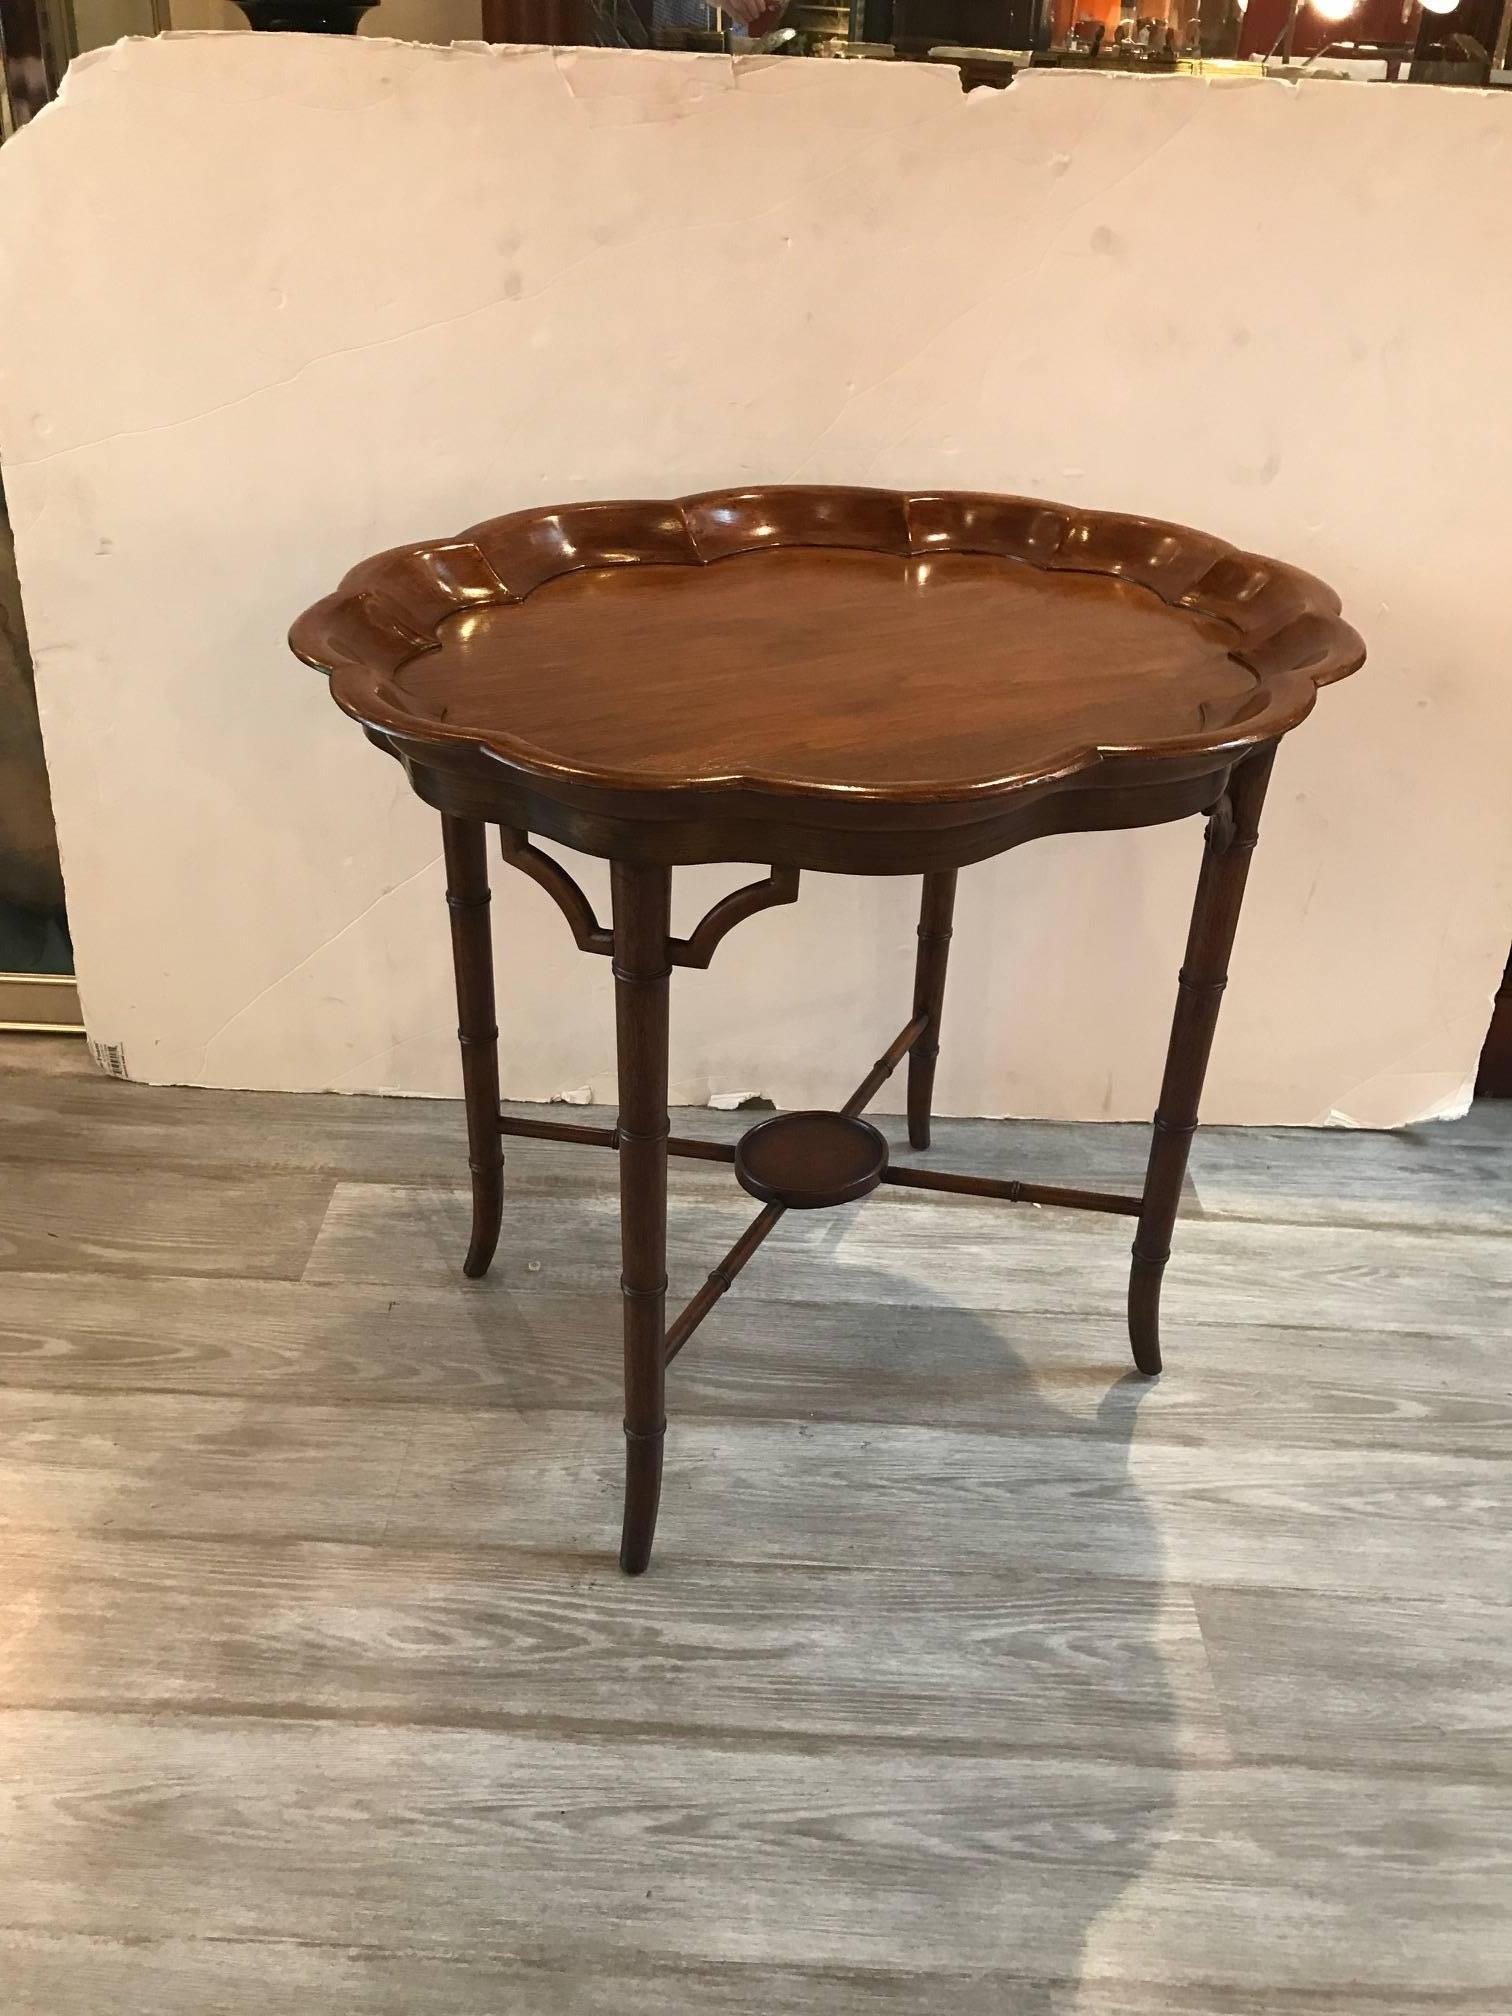 Oval walnut table with deep hand-carved piecrust gallery edge. The warm mellow medium to dark stain with Regency style flared legs and central oval plateau stretcher base. Graceful and elegant.